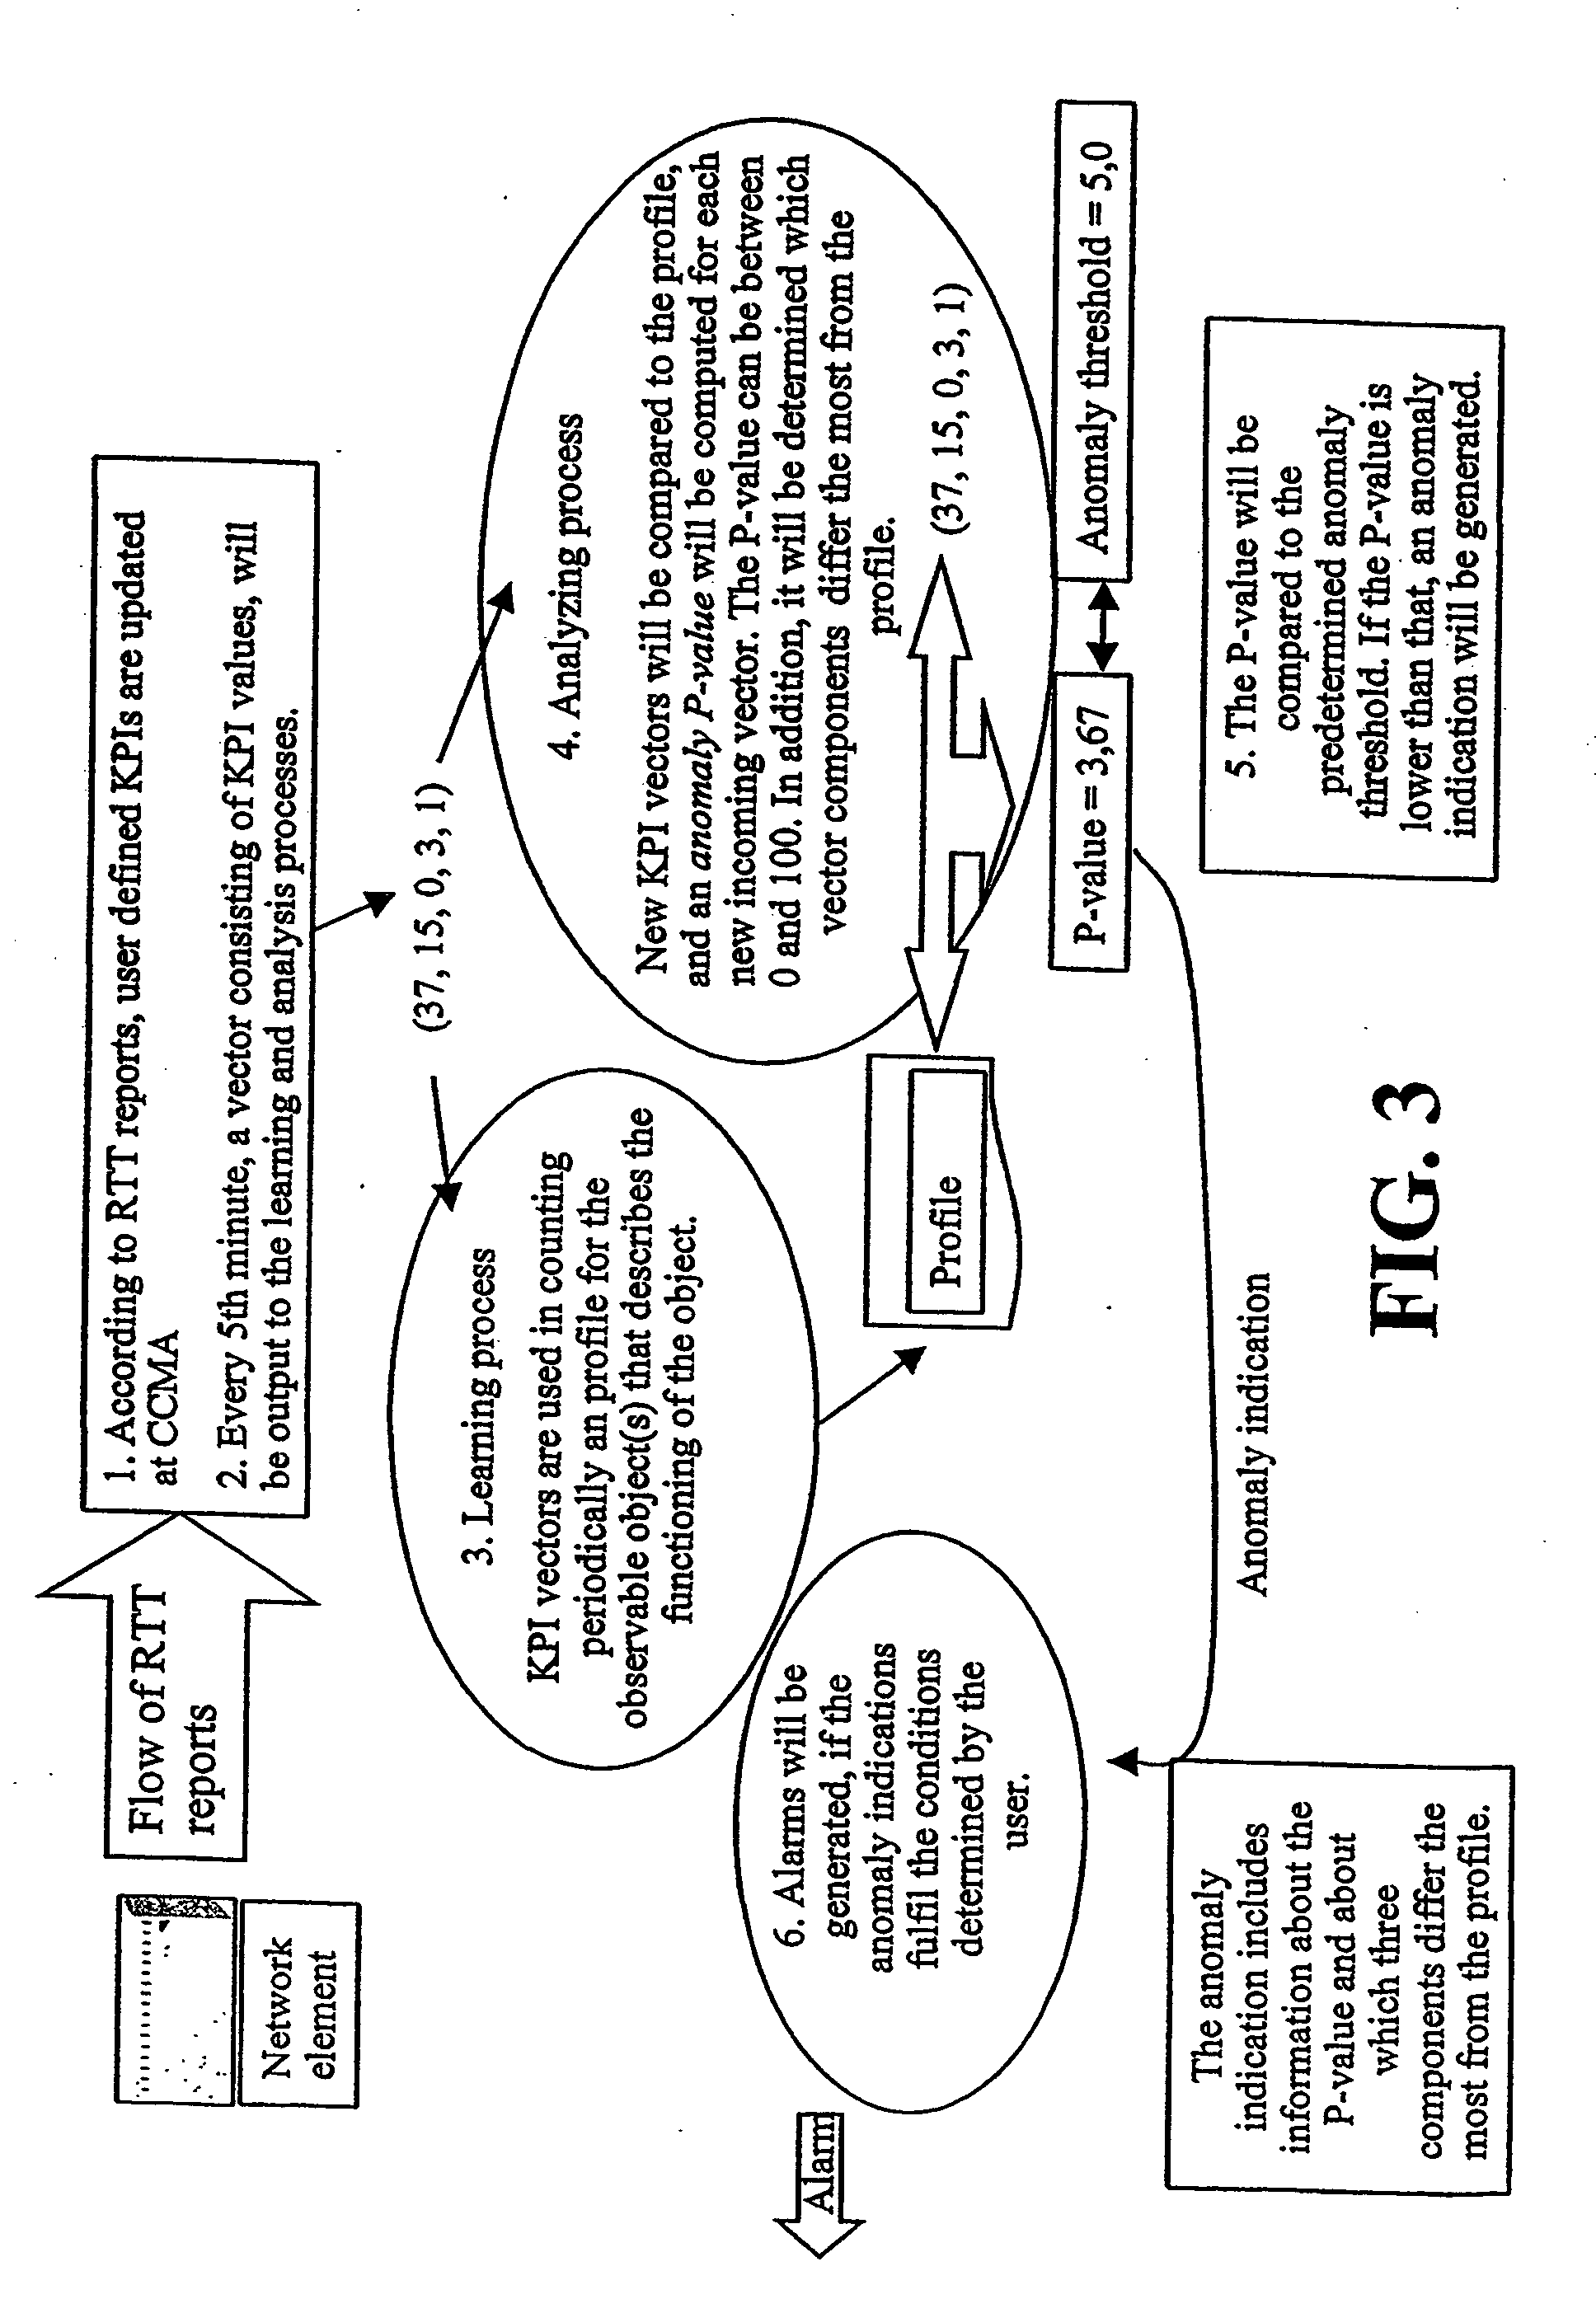 System, device and method for automatic anomally detection